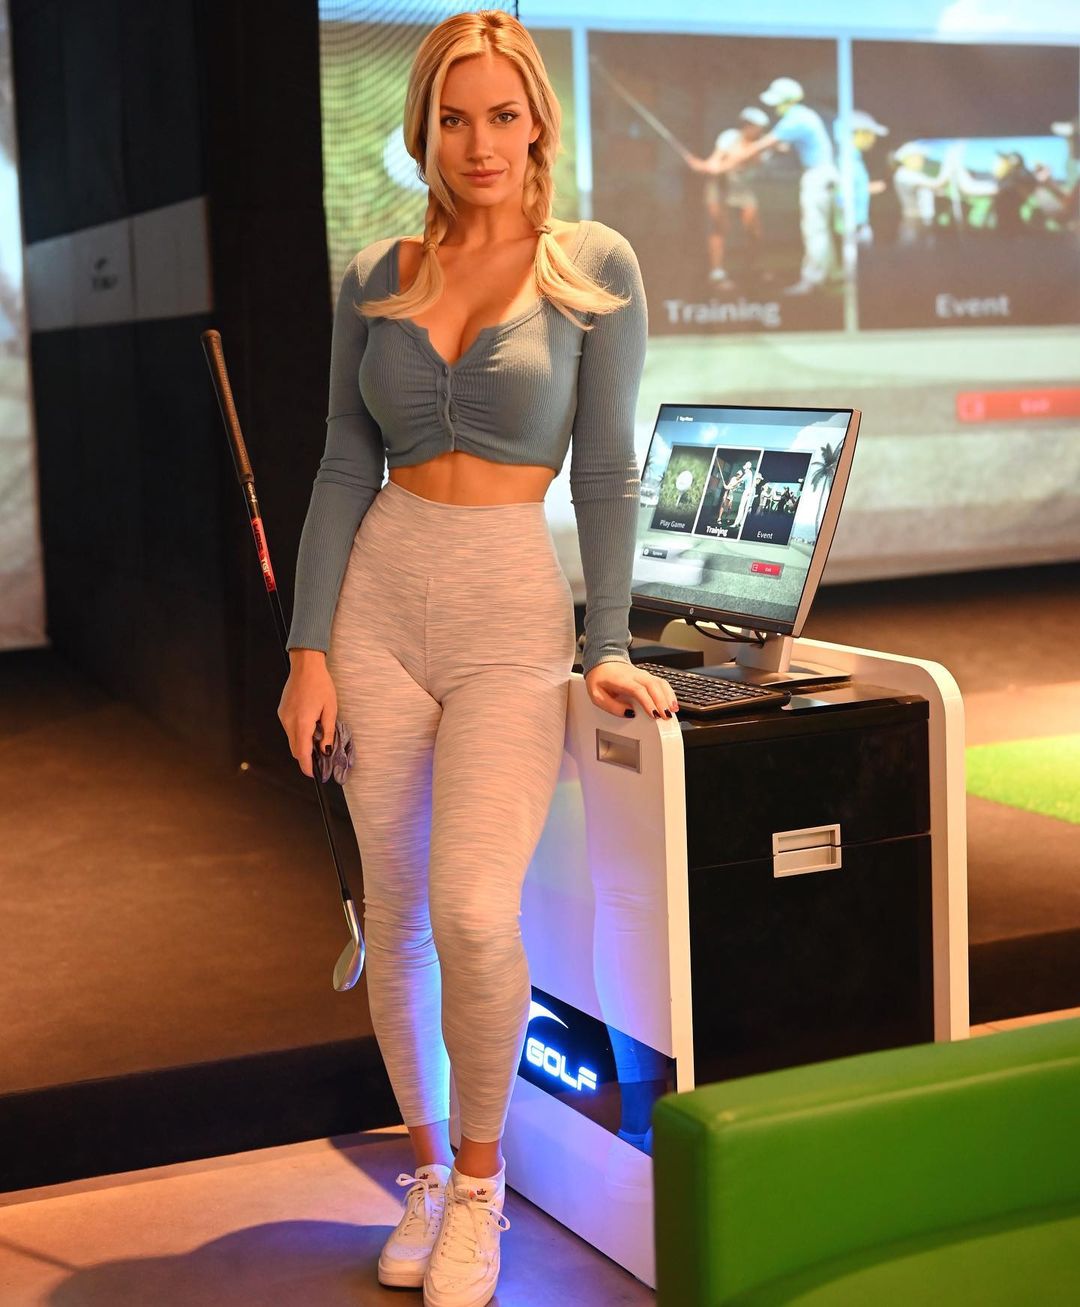 Photos n ° 1 : Paige Spiranac Sets the Record Straight on Her Golf Game and...